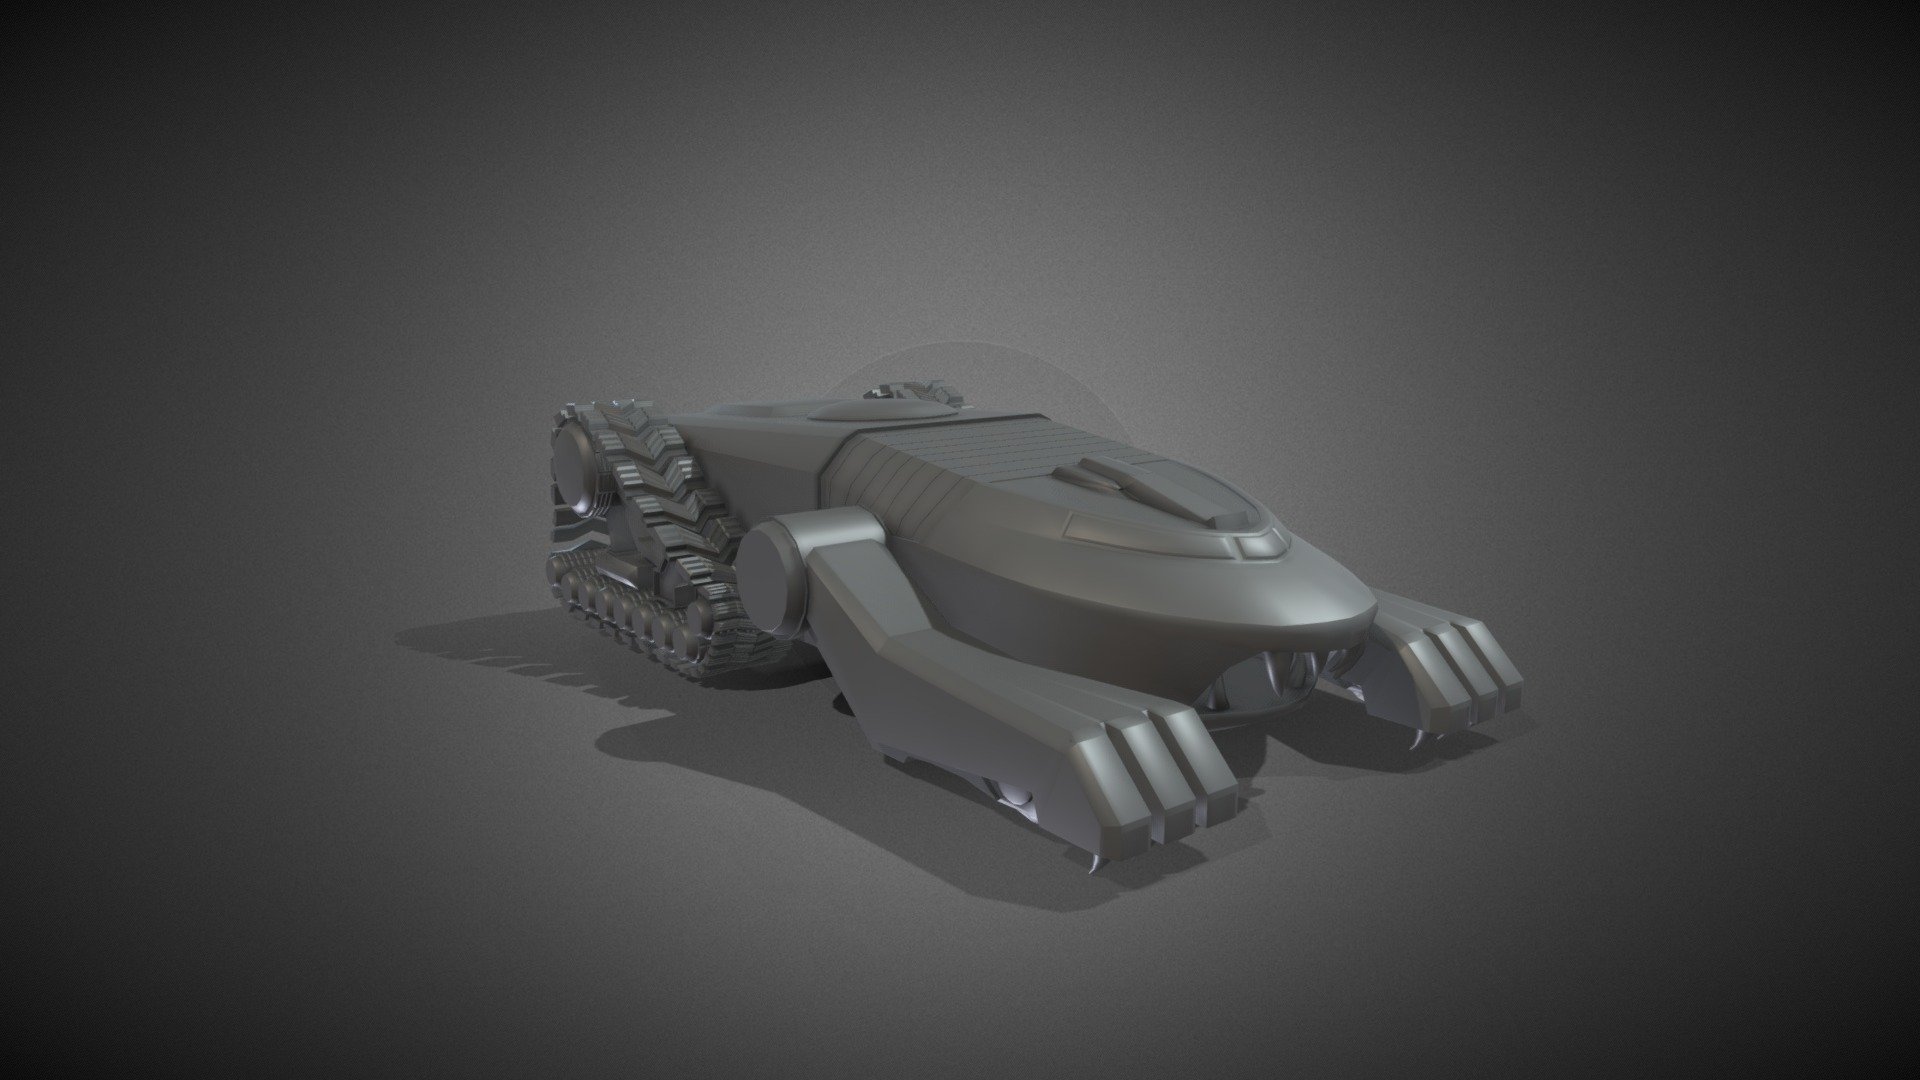 A 3D model of Thundercats vehicle - Thunder Tank - Download Free 3D model by MAster.P (@Miguel.Astudillo) 3d model